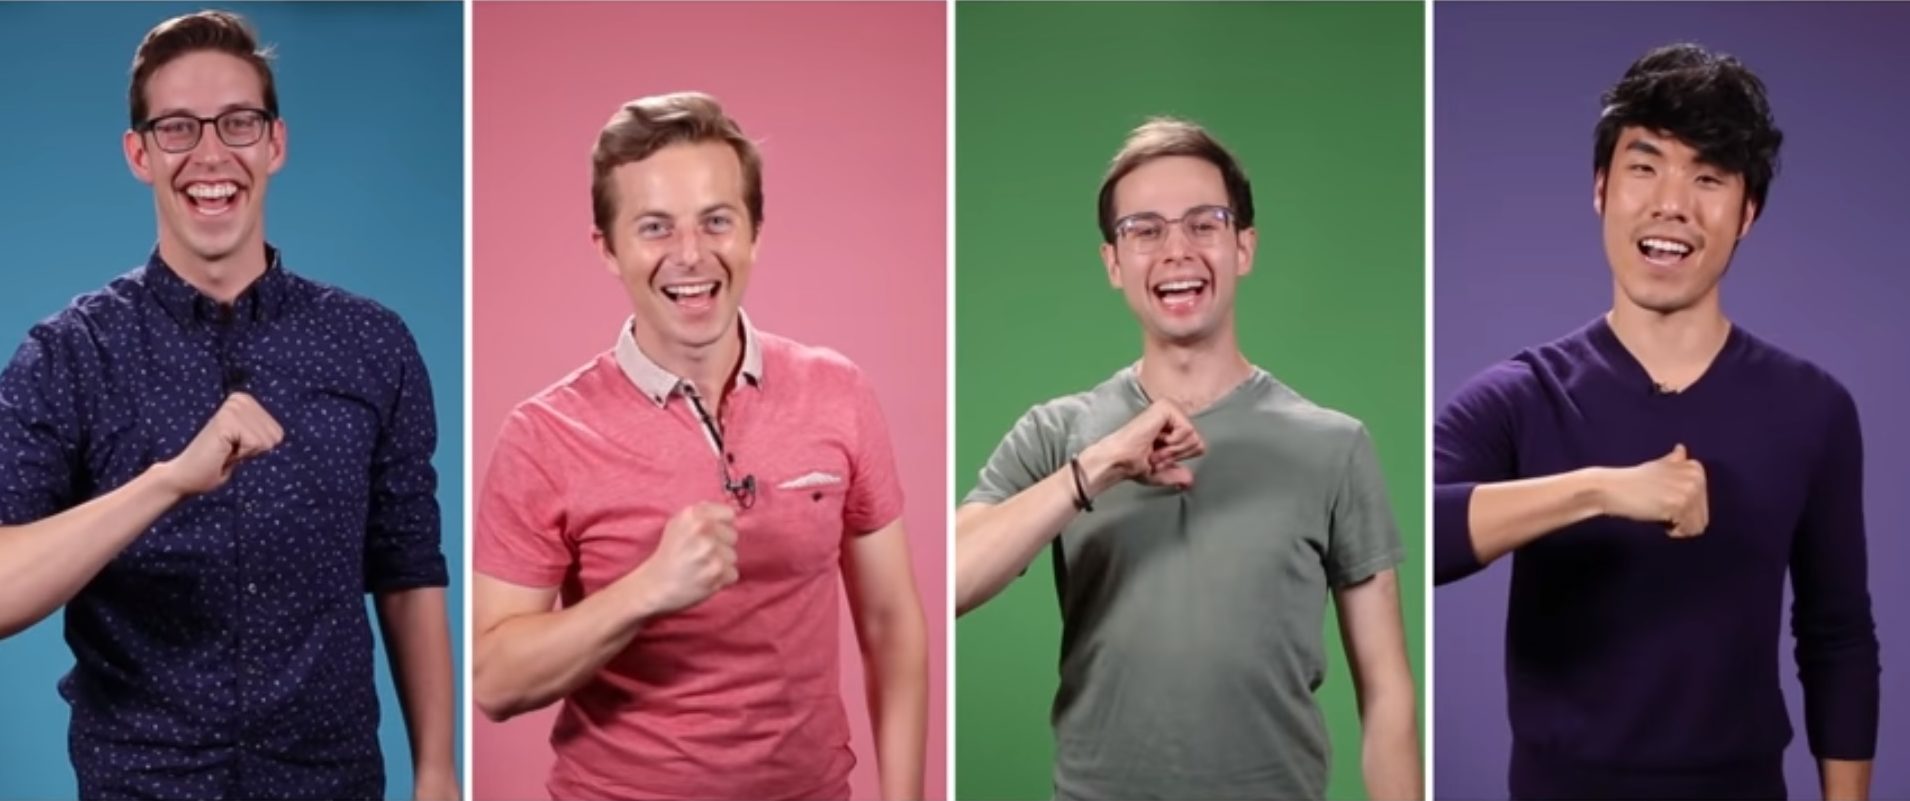 Comedy group The Try Guys, which became famous for their YouTube viral vide...